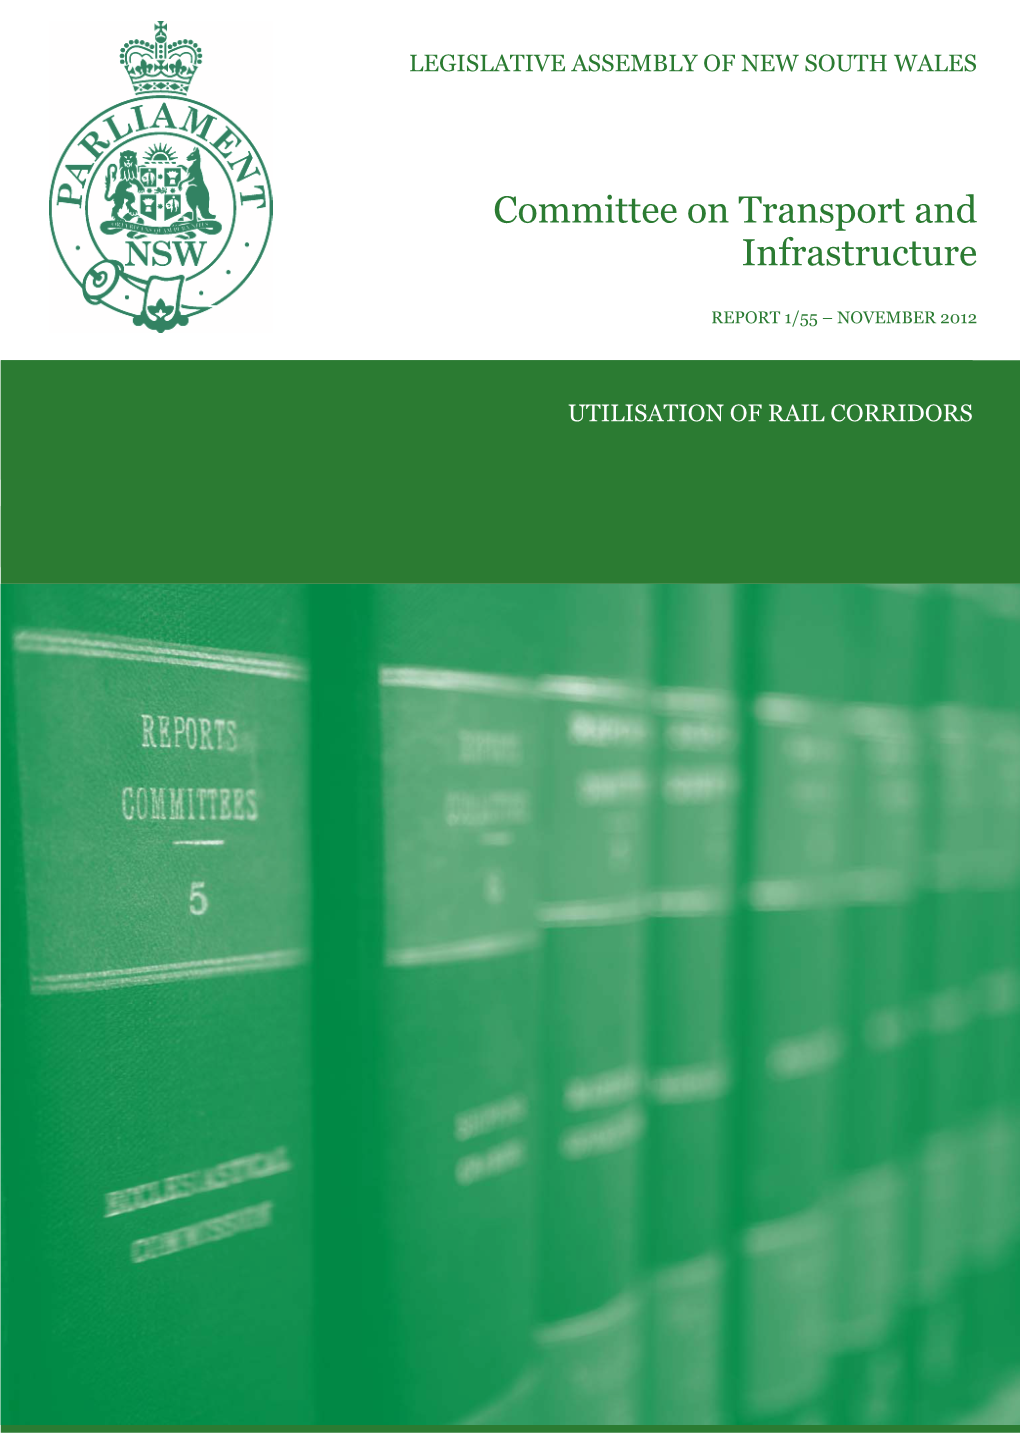 Committee on Transport and Infrastructure